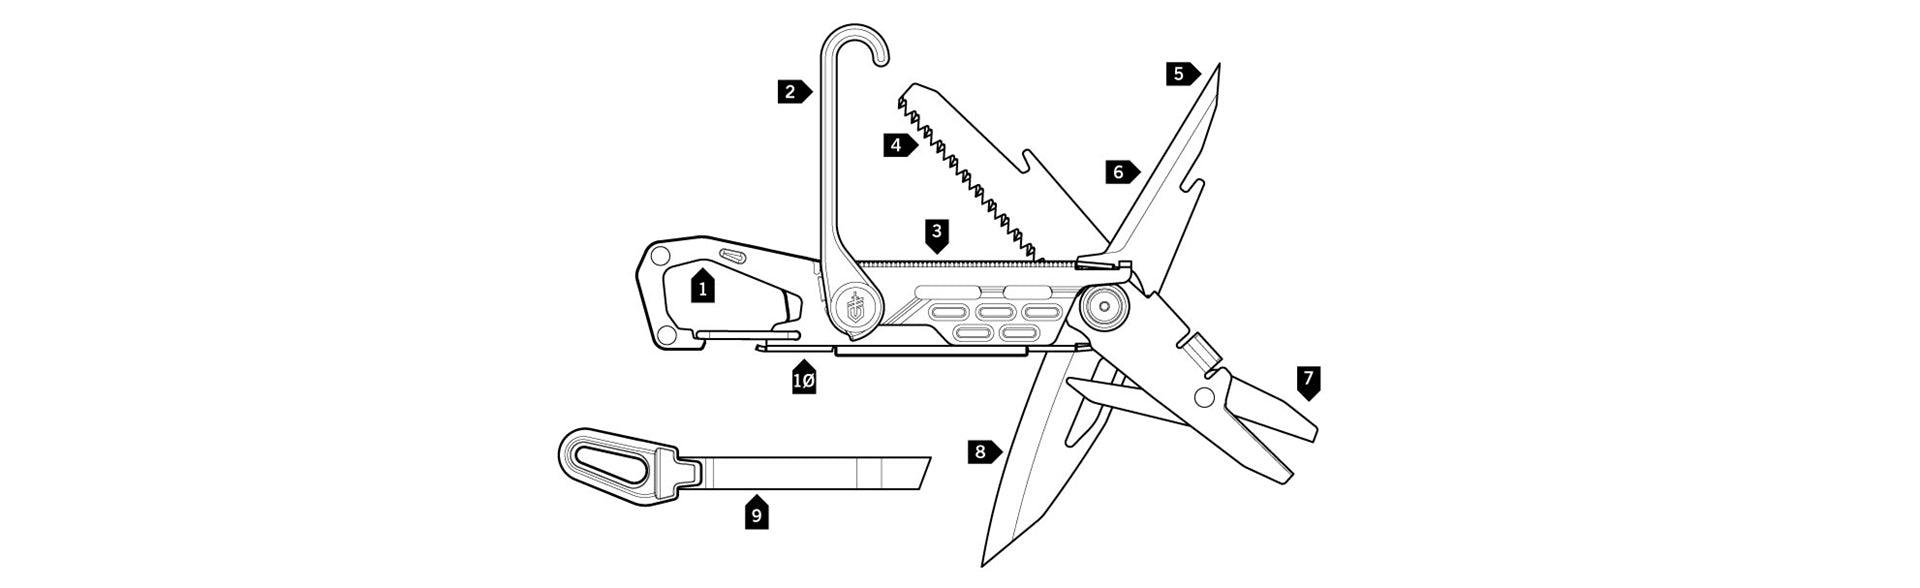 Gerber Stake Out Multi Tool Silver - Knives.mx